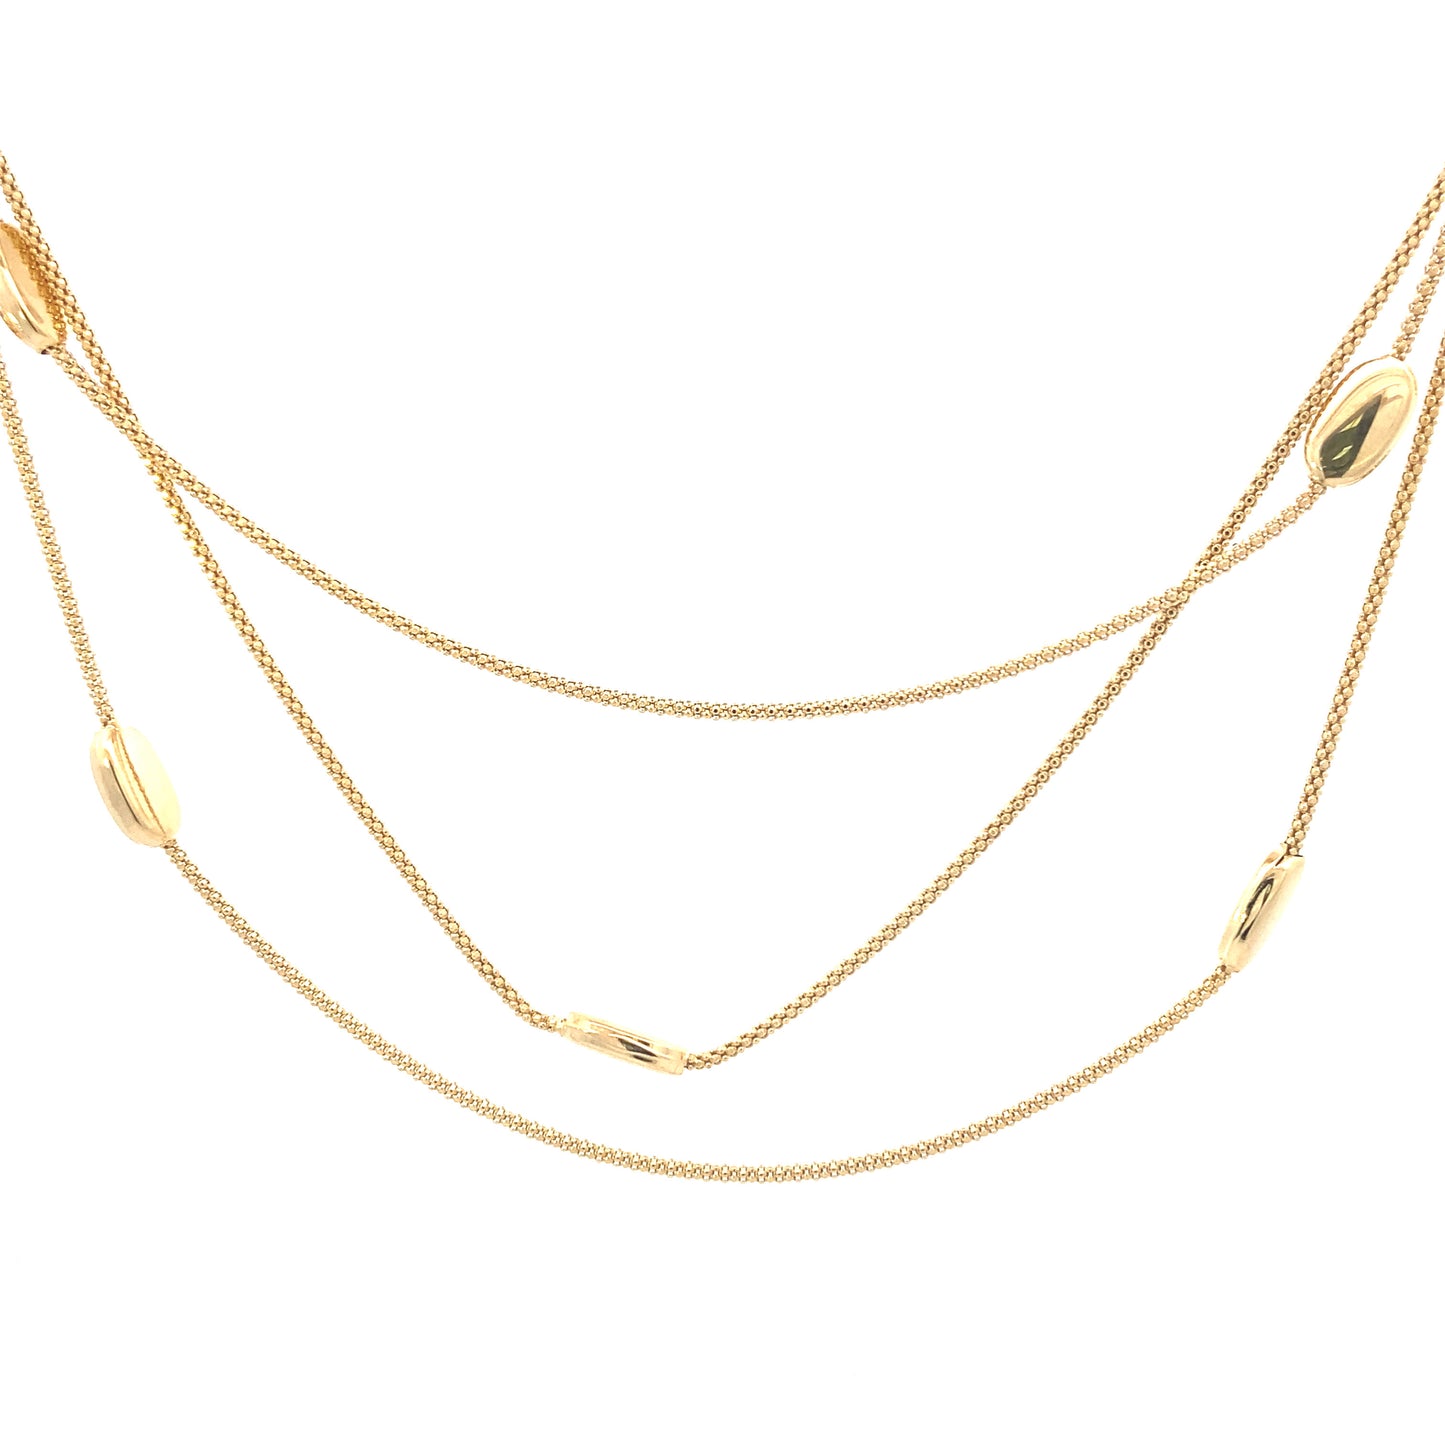 Marcelo Pane Flat Accents Necklace | Marcello Pane | Luby 